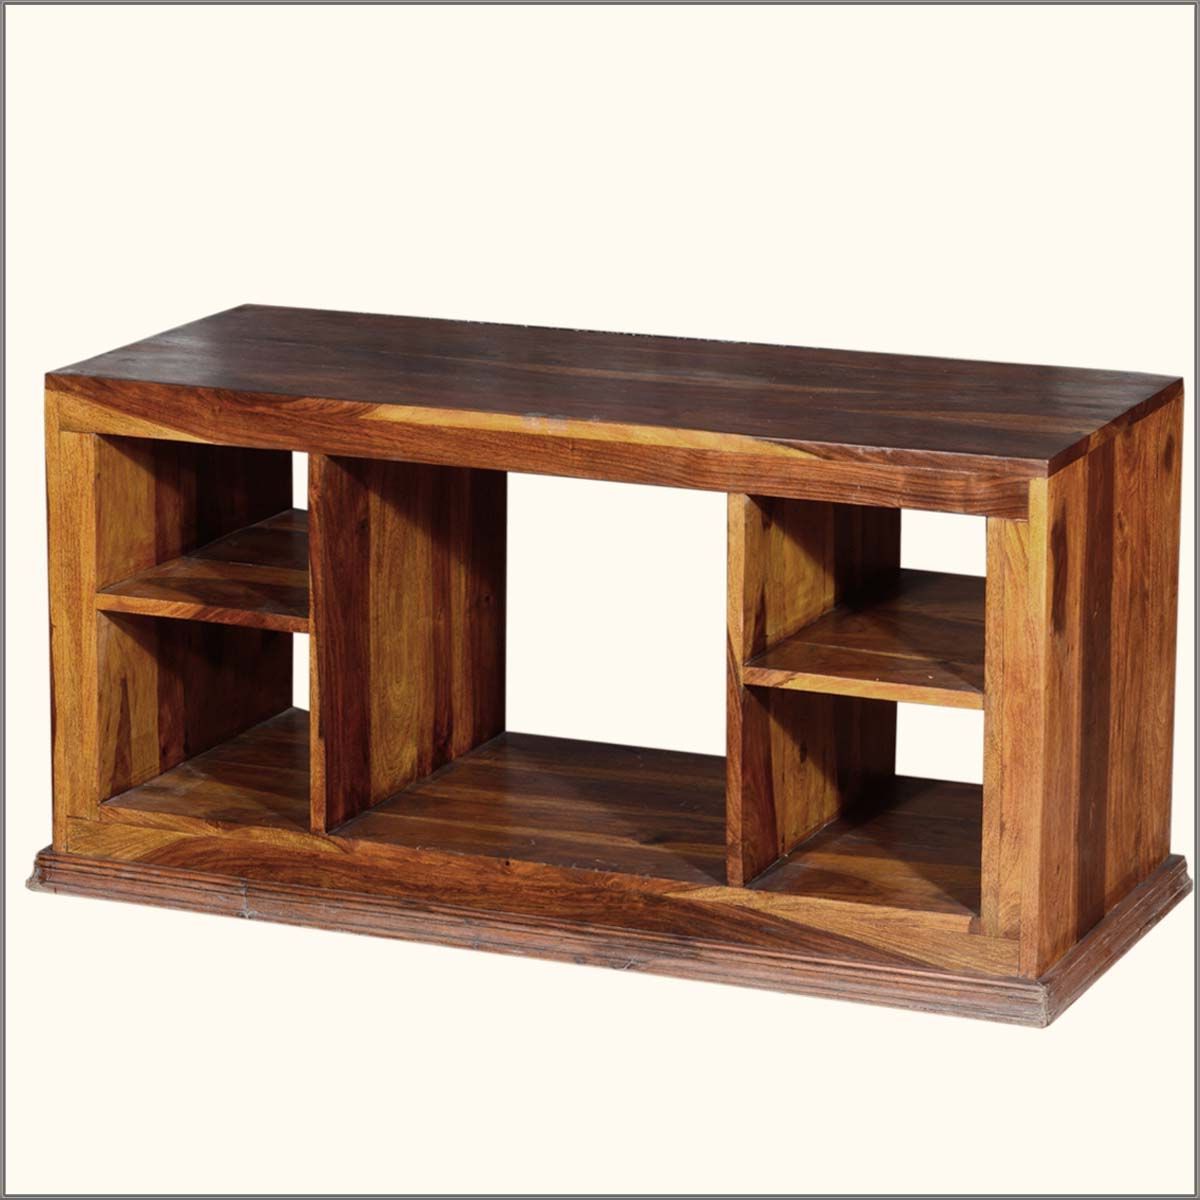 Popular Hard Wood Tv Stands For Dallas Contemporary Solid Hardwood Open Back Tv Stand Media Console (View 12 of 20)